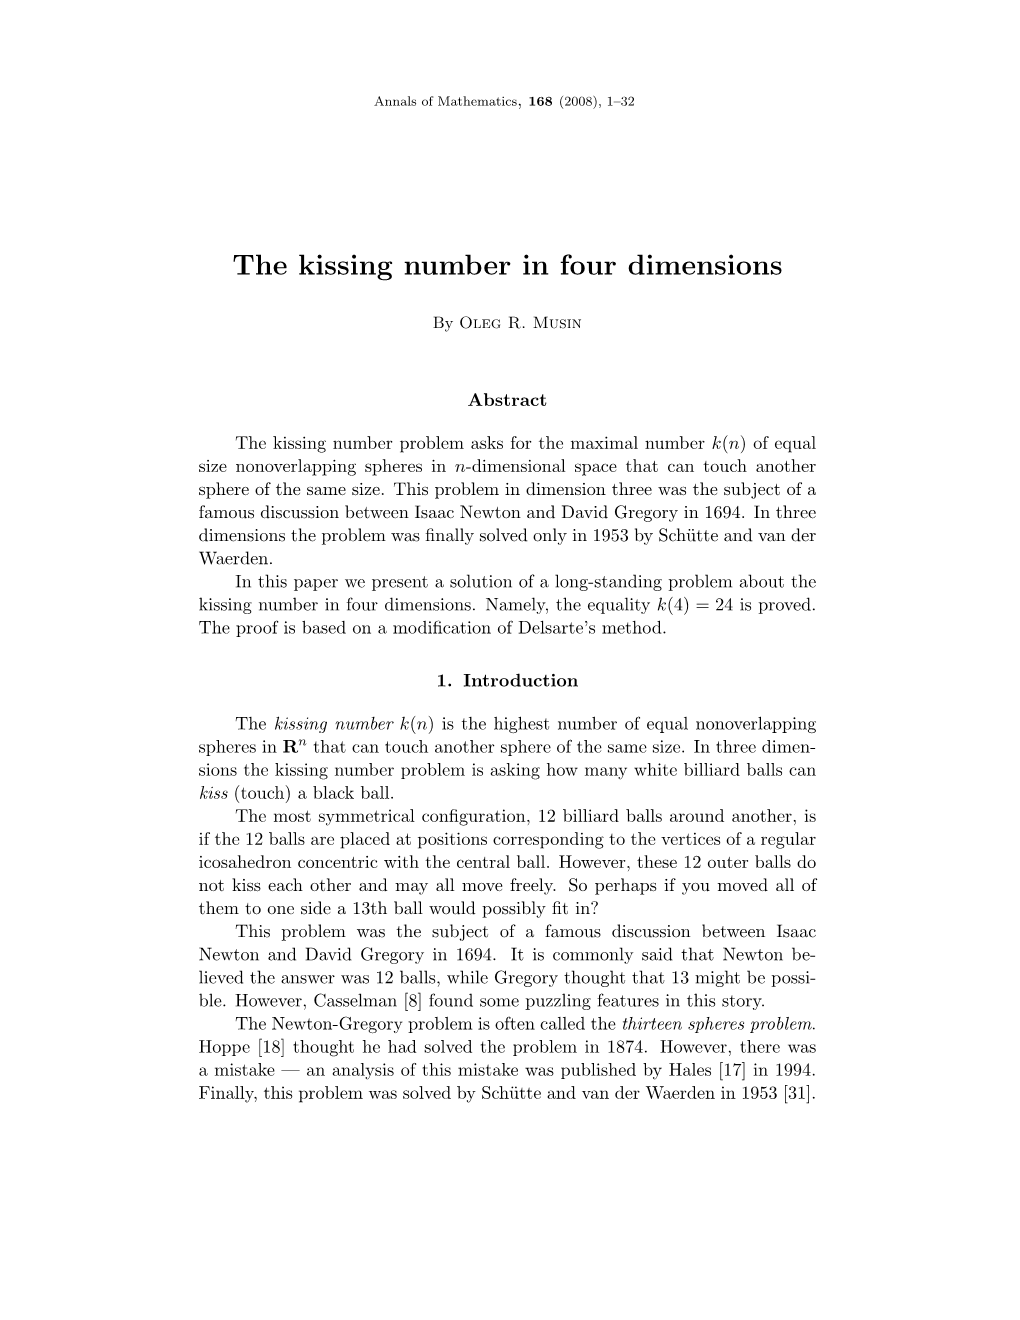 The Kissing Number in Four Dimensions